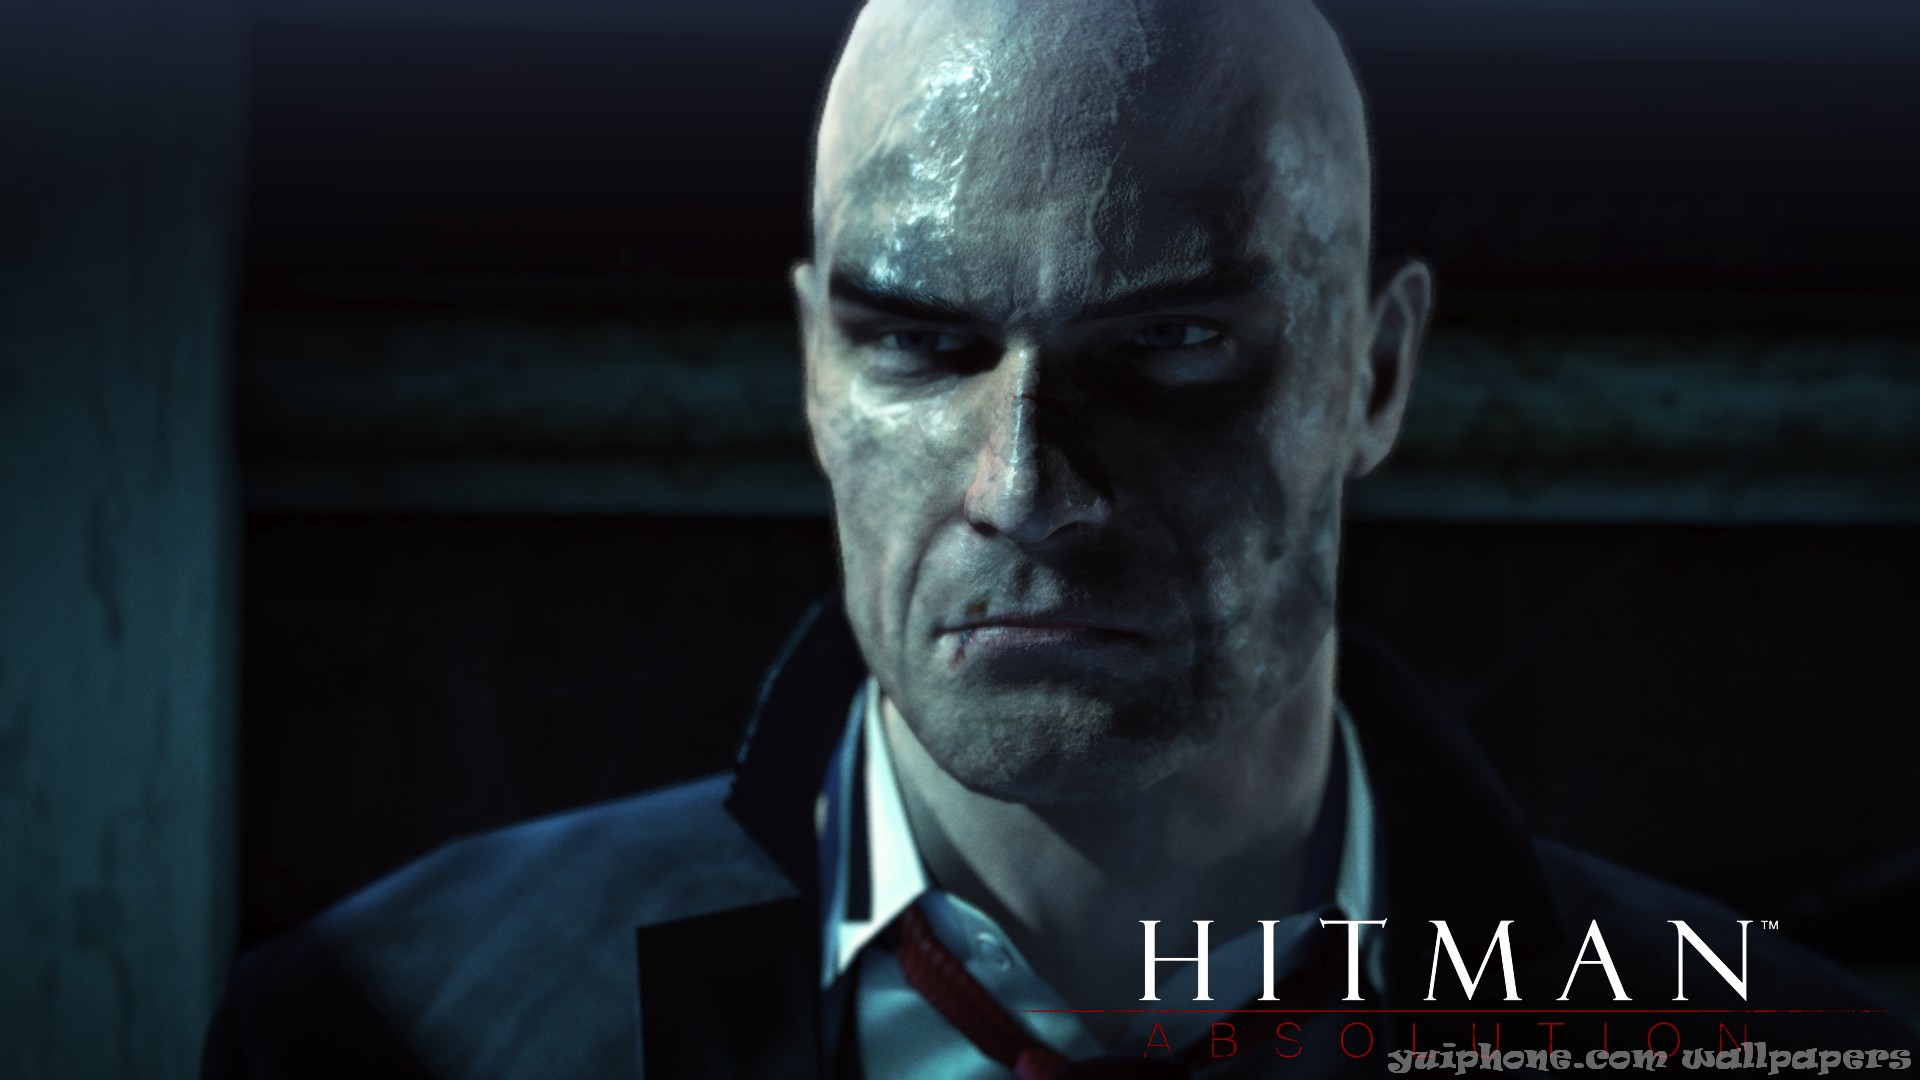 Hitman After Burning Hotel Close Up Absolution Wallpaper 1080p